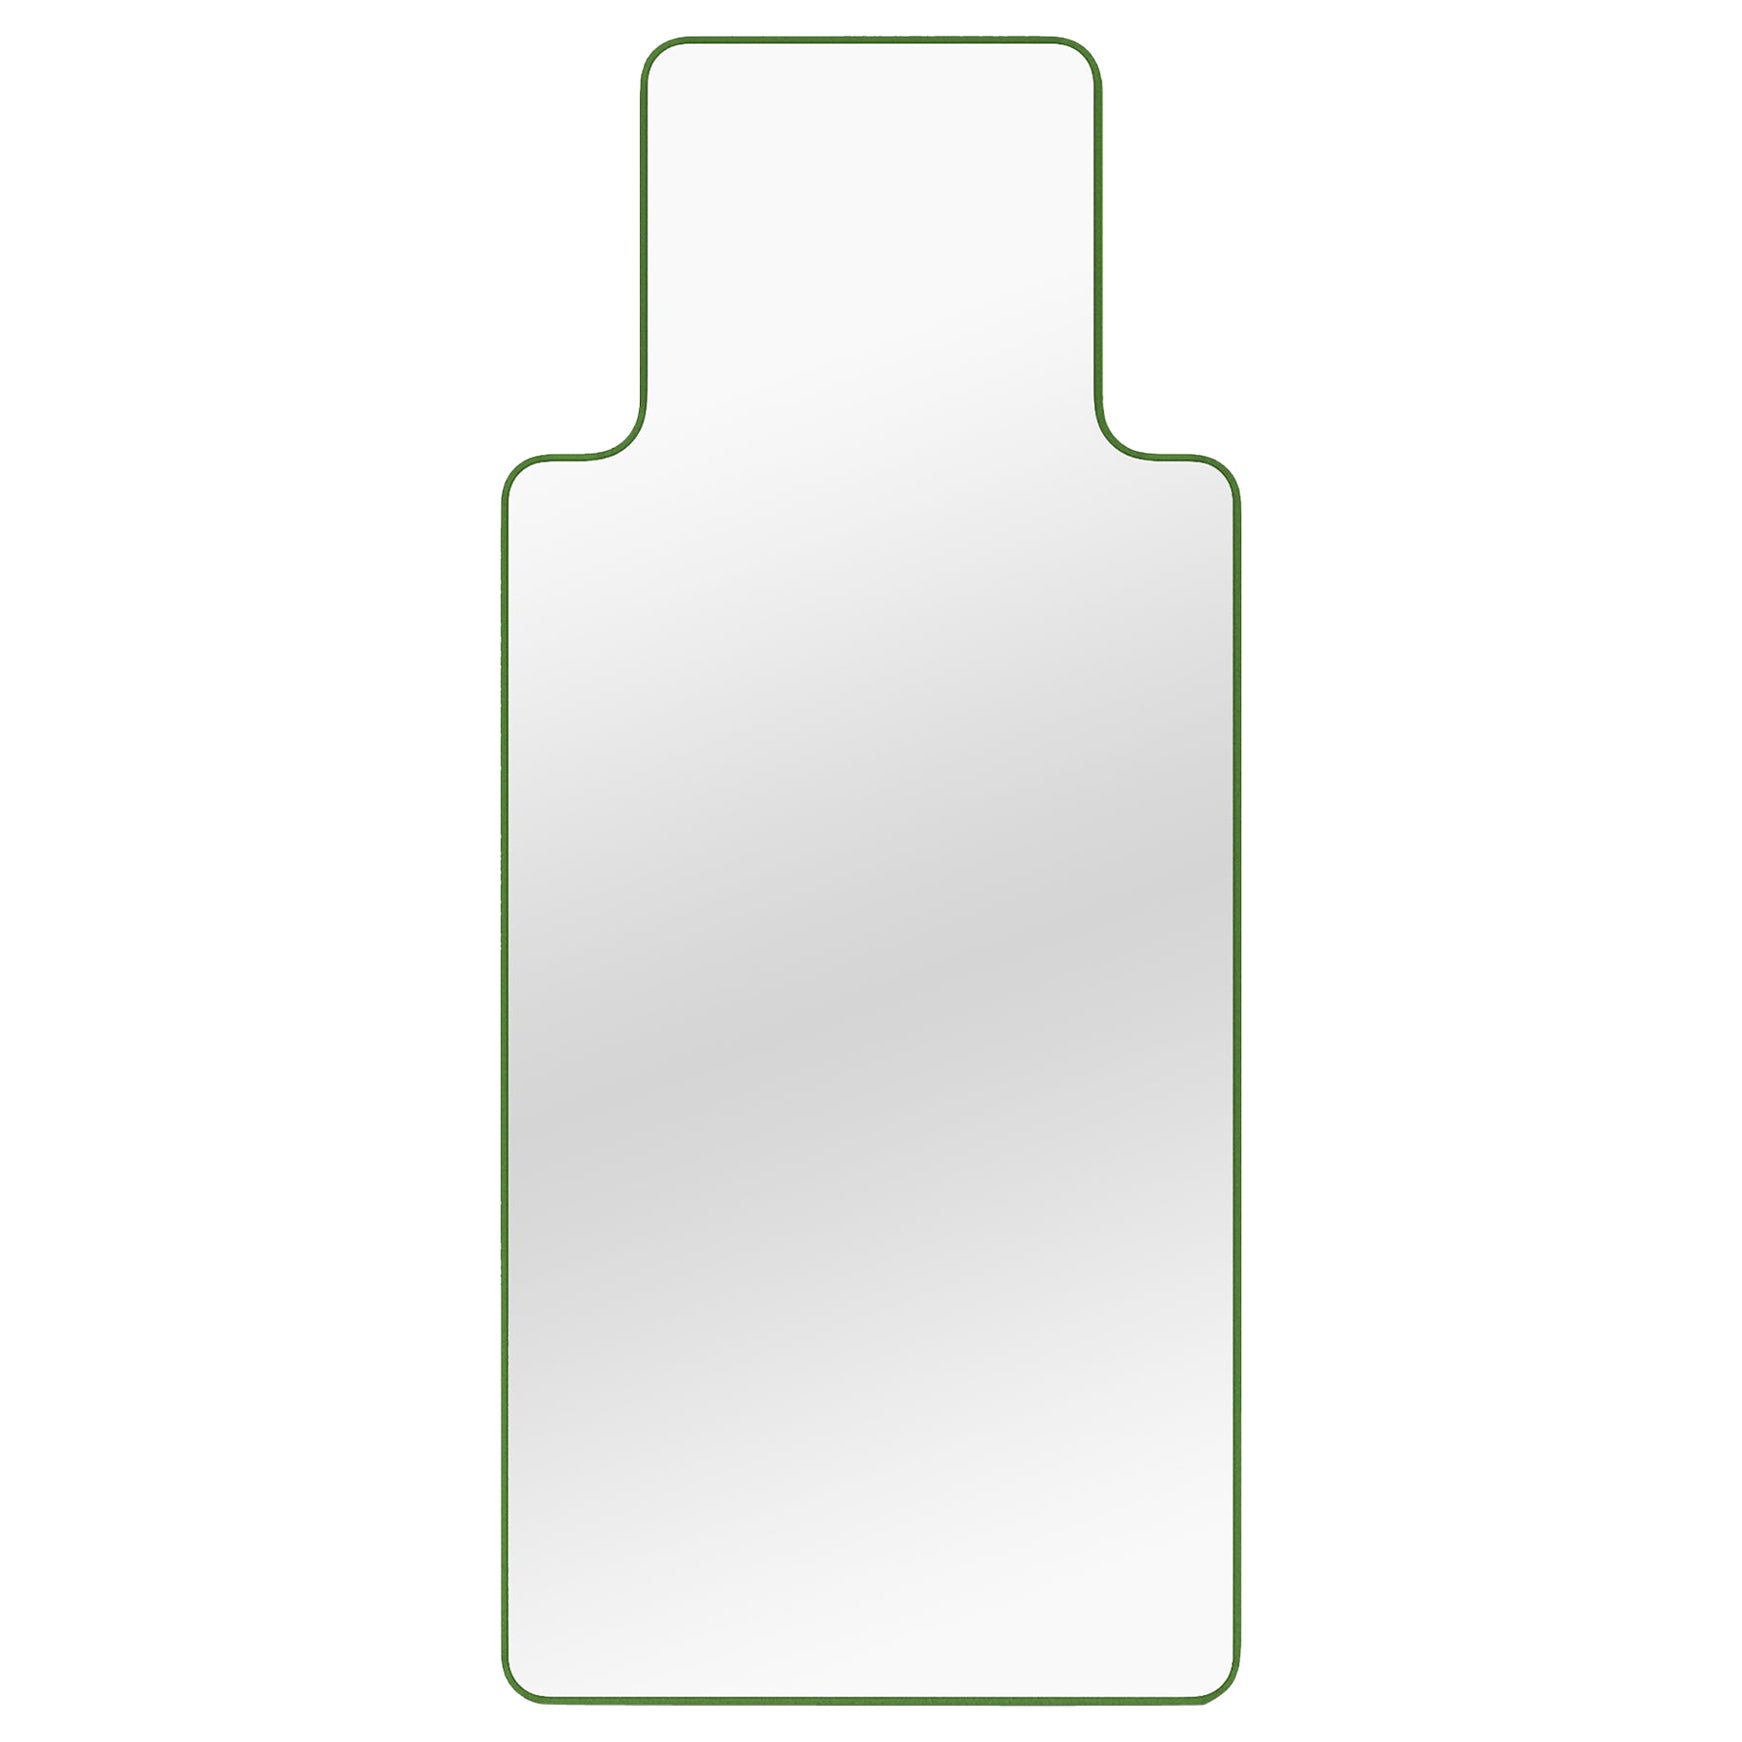 Contemporary Mirror 'Loveself 02' by Oitoproducts, Green Frame